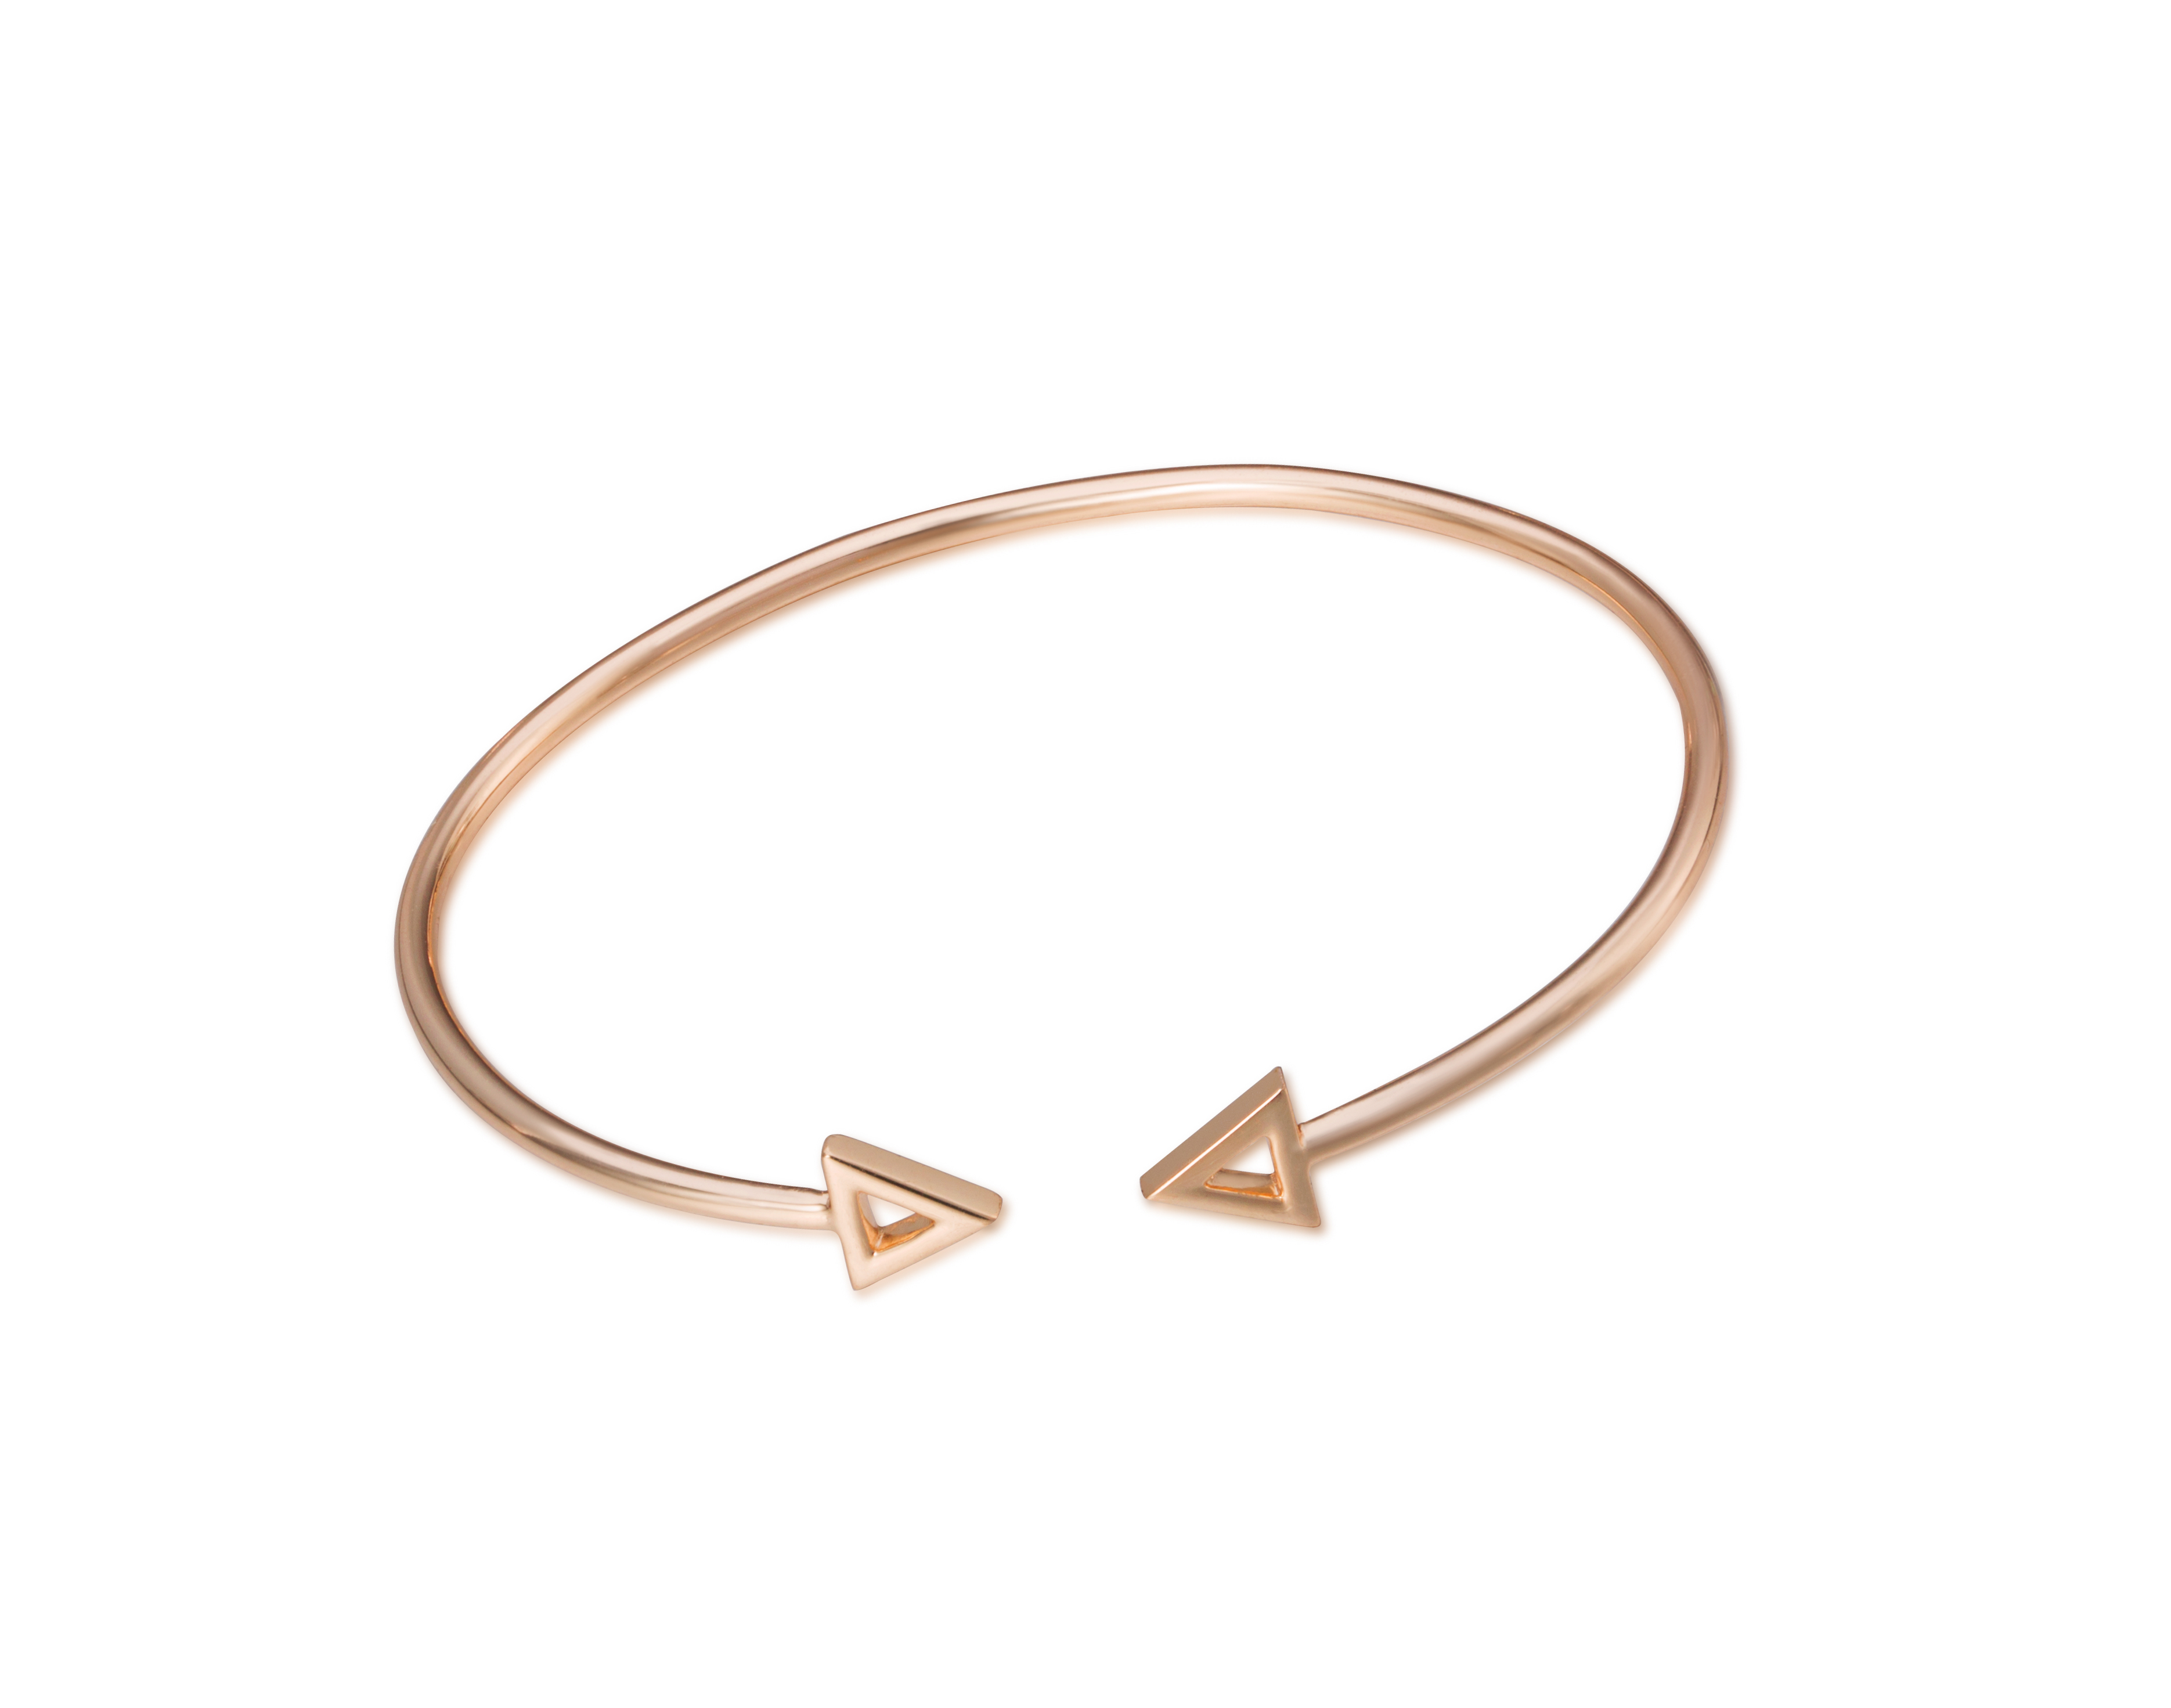 Good design brass bracelet rose gold plated bangles for party women elegant 14k gold plated jewelry (图2)